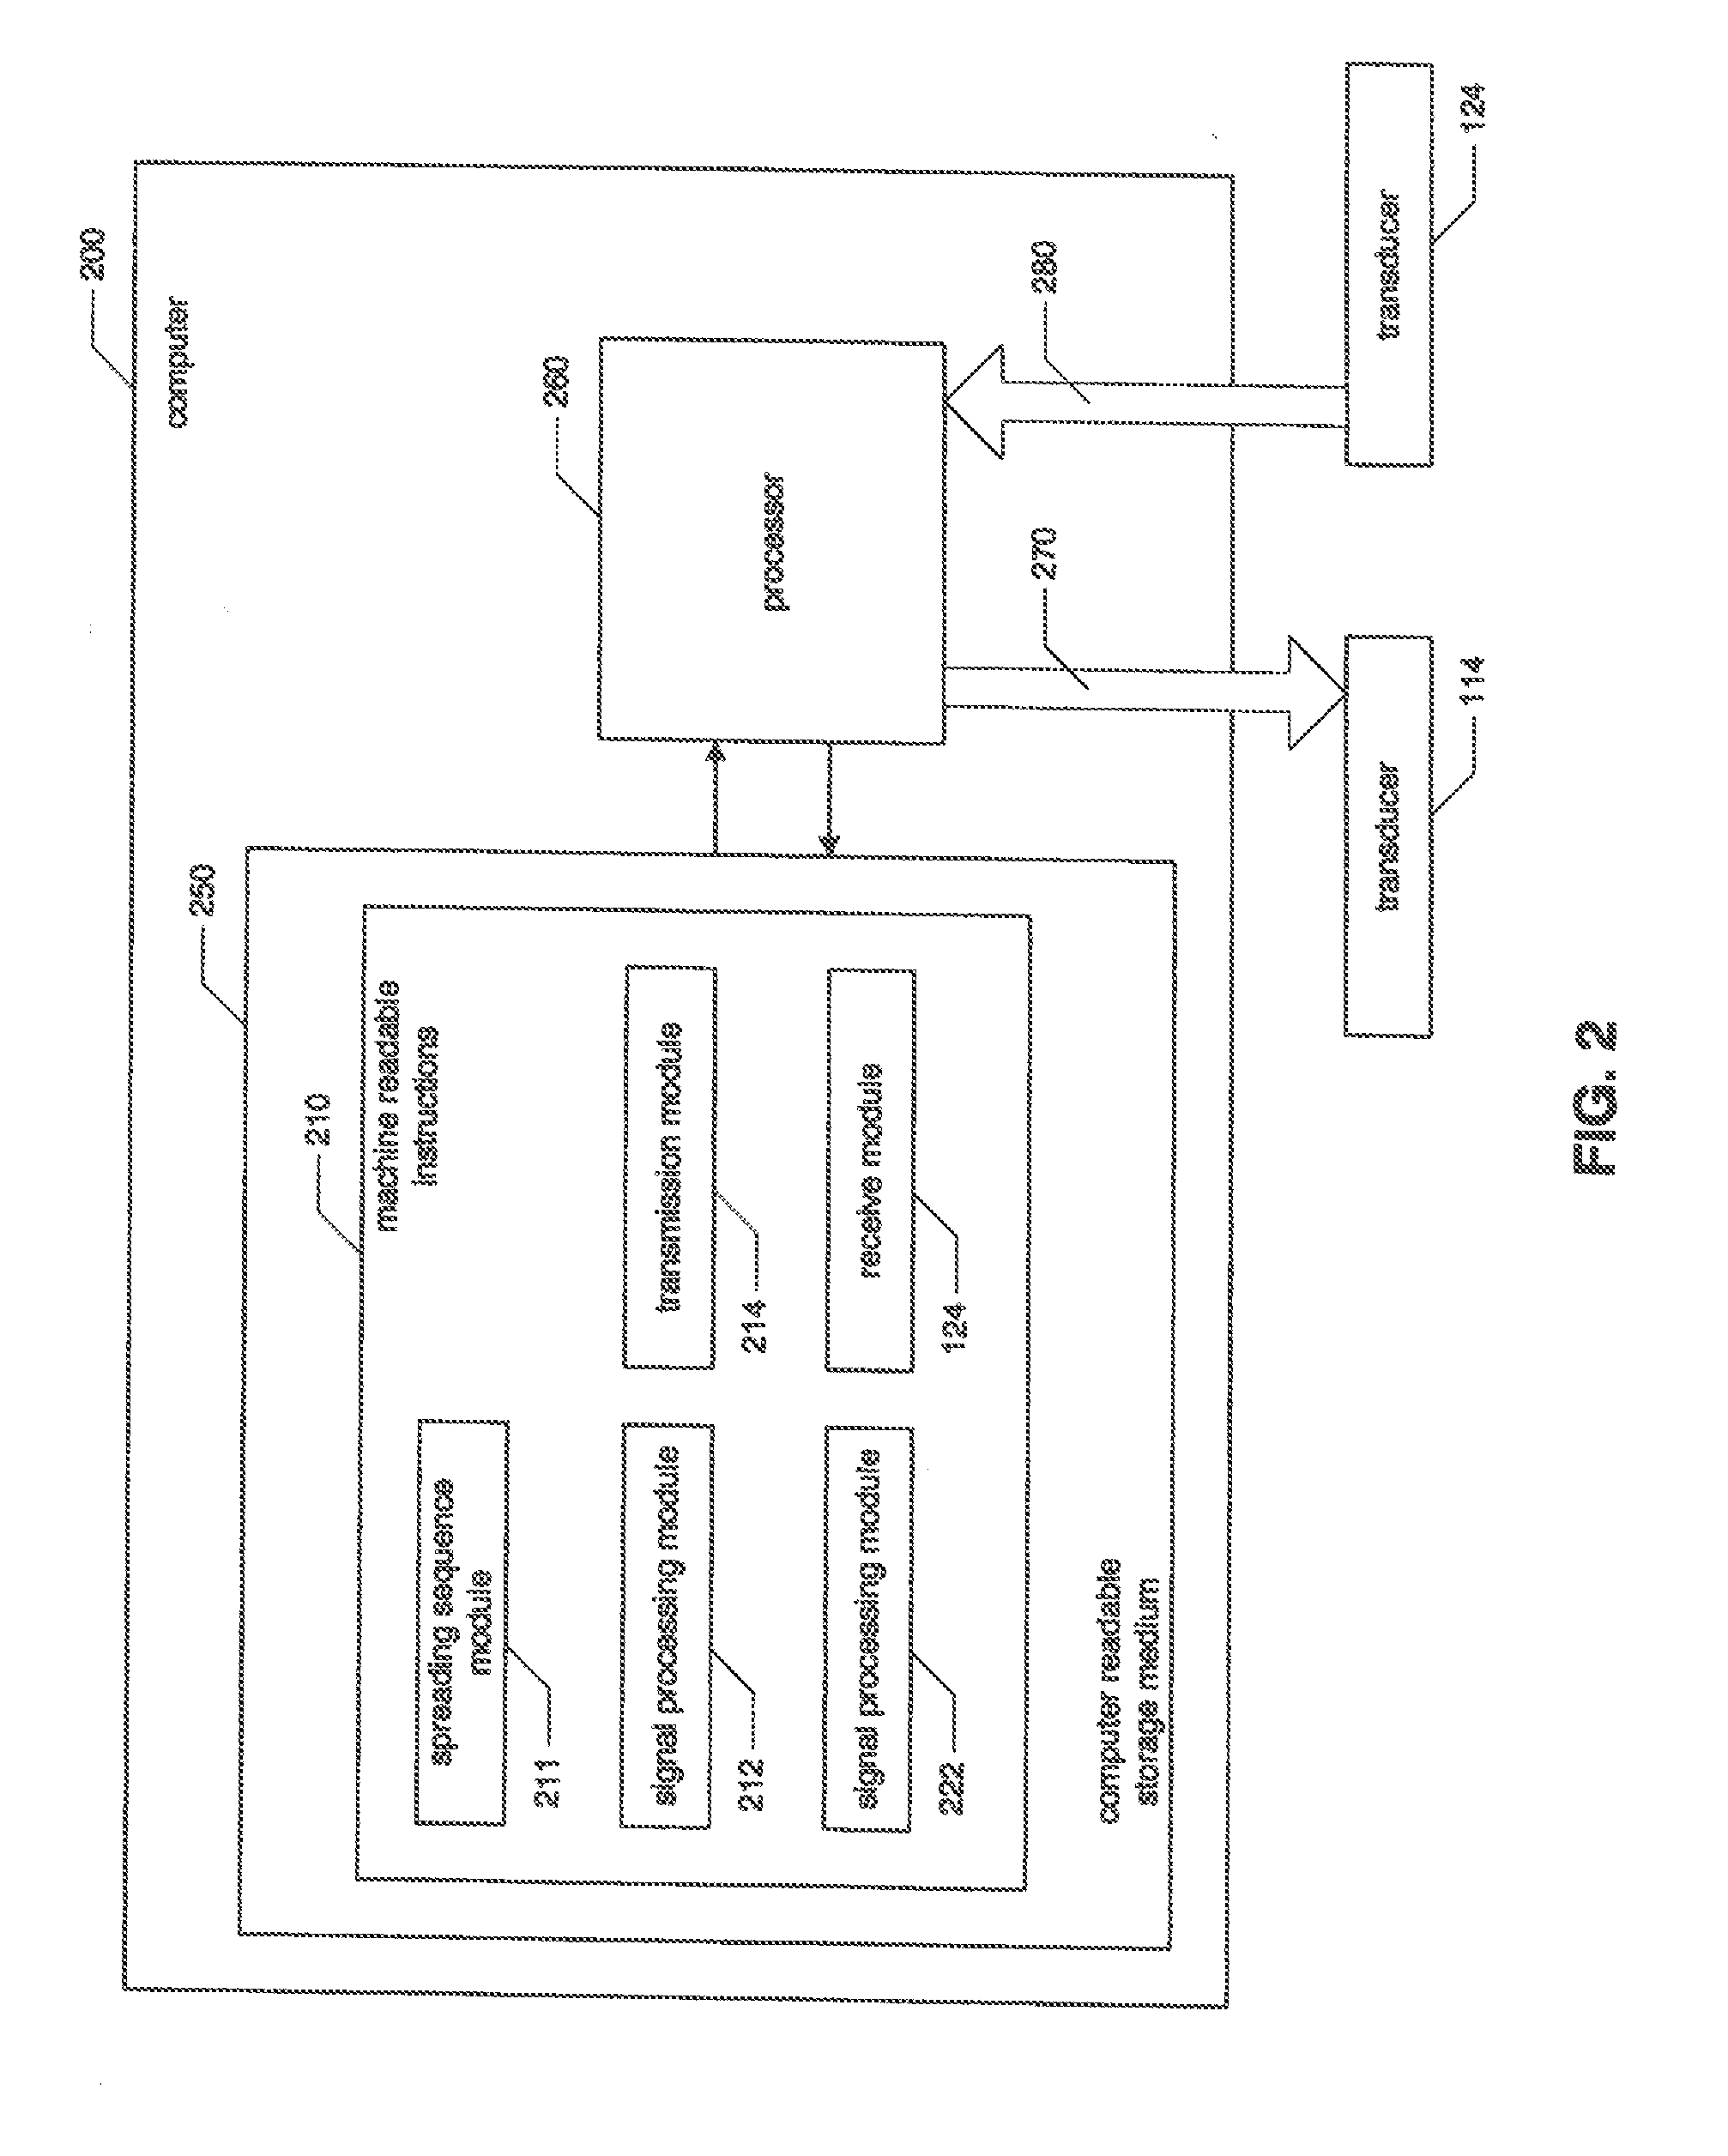 System and method for seismological sounding